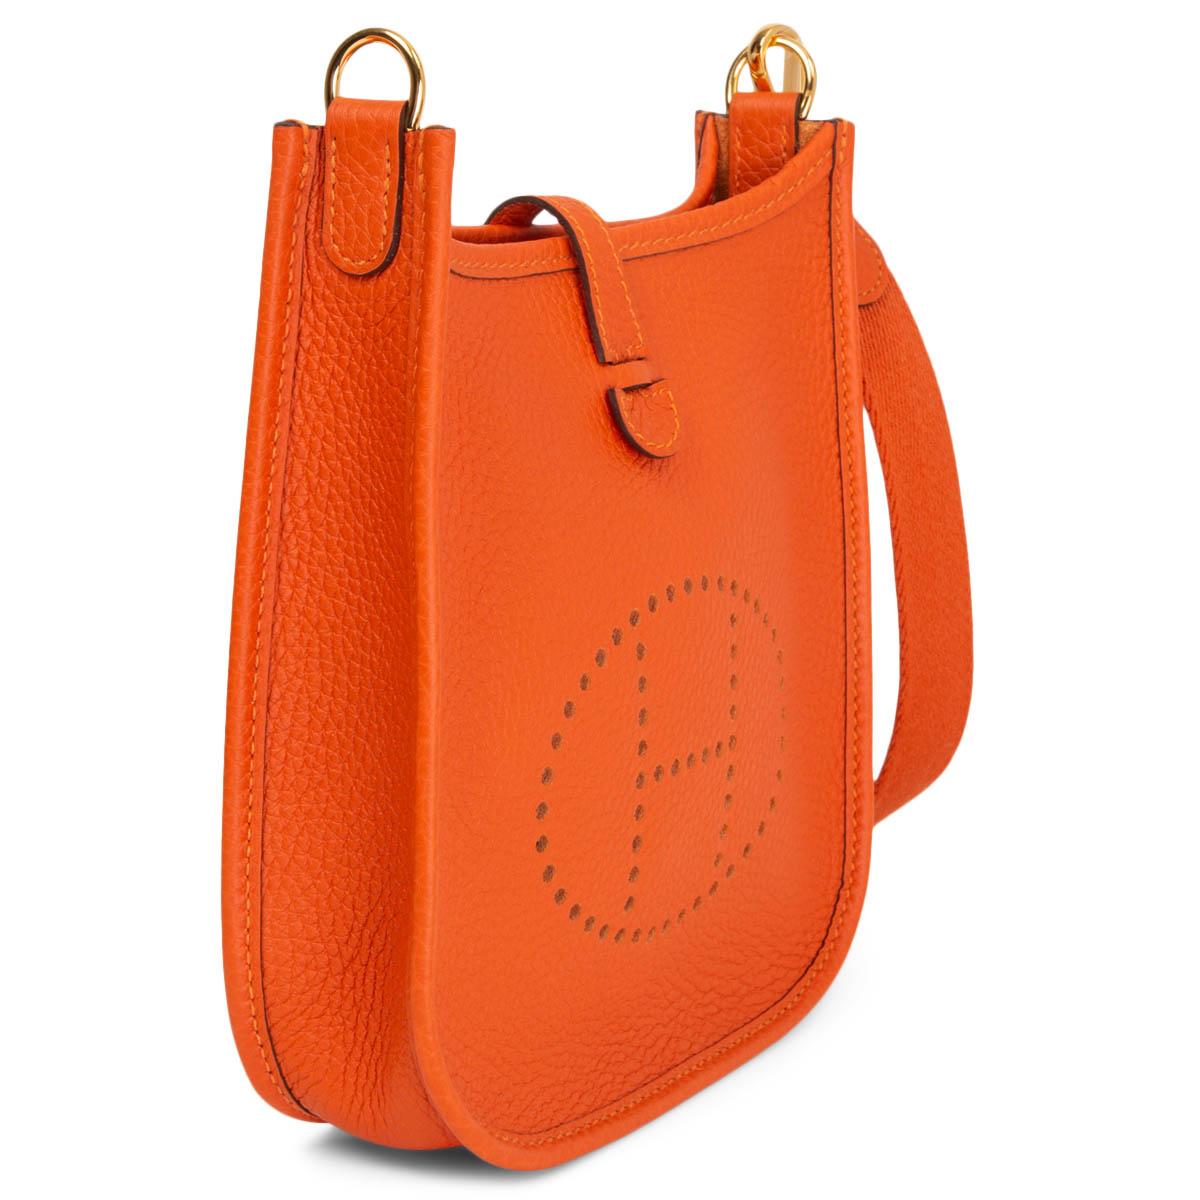 100% authentic Hermès Evelyne 16 Amazone crossbody bag in Feu (orange) Taurillon Clemence leather with sangle wool strap in Feu, perforated leather 